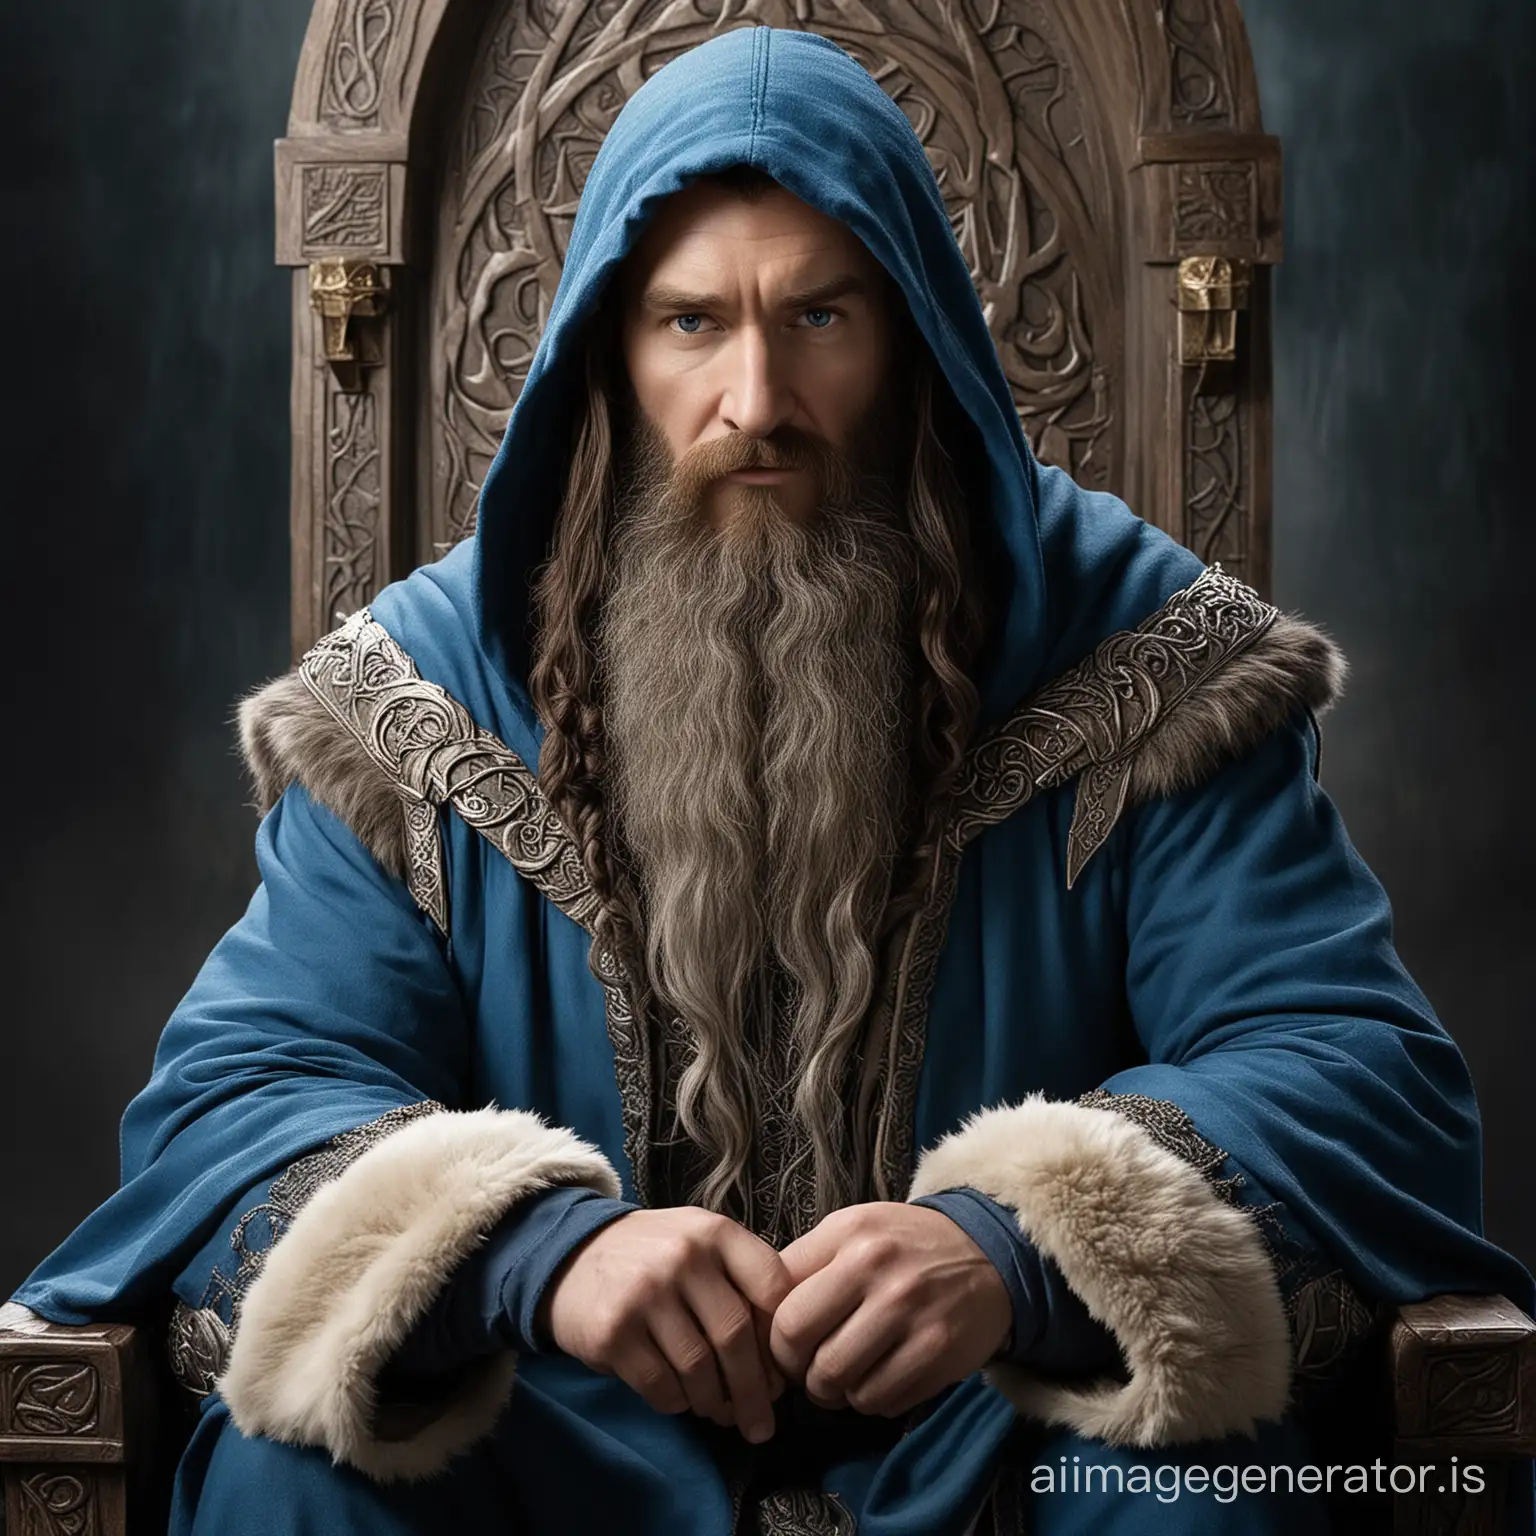 Thorin-Oakenshield-The-Hobbit-Dwarf-Seated-on-Majestic-Golden-Throne